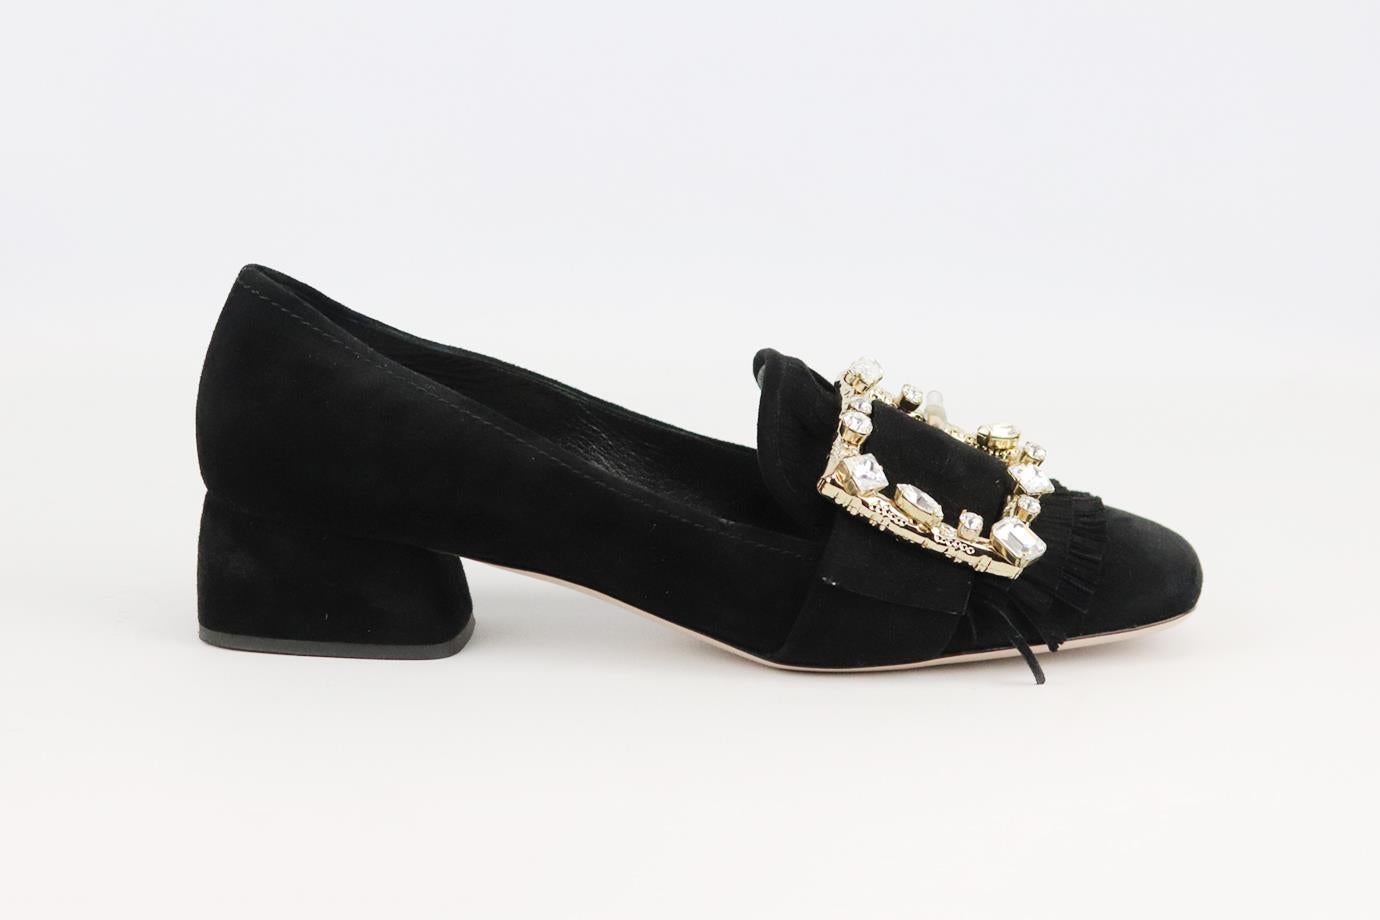 Miu Miu crystal embellished suede loafers. Black. Slips on. Does not come with box or dustbag. Size: EU 40 (UK 7, US 10). Insole: 10.5 in. Heel: 1.5 in
